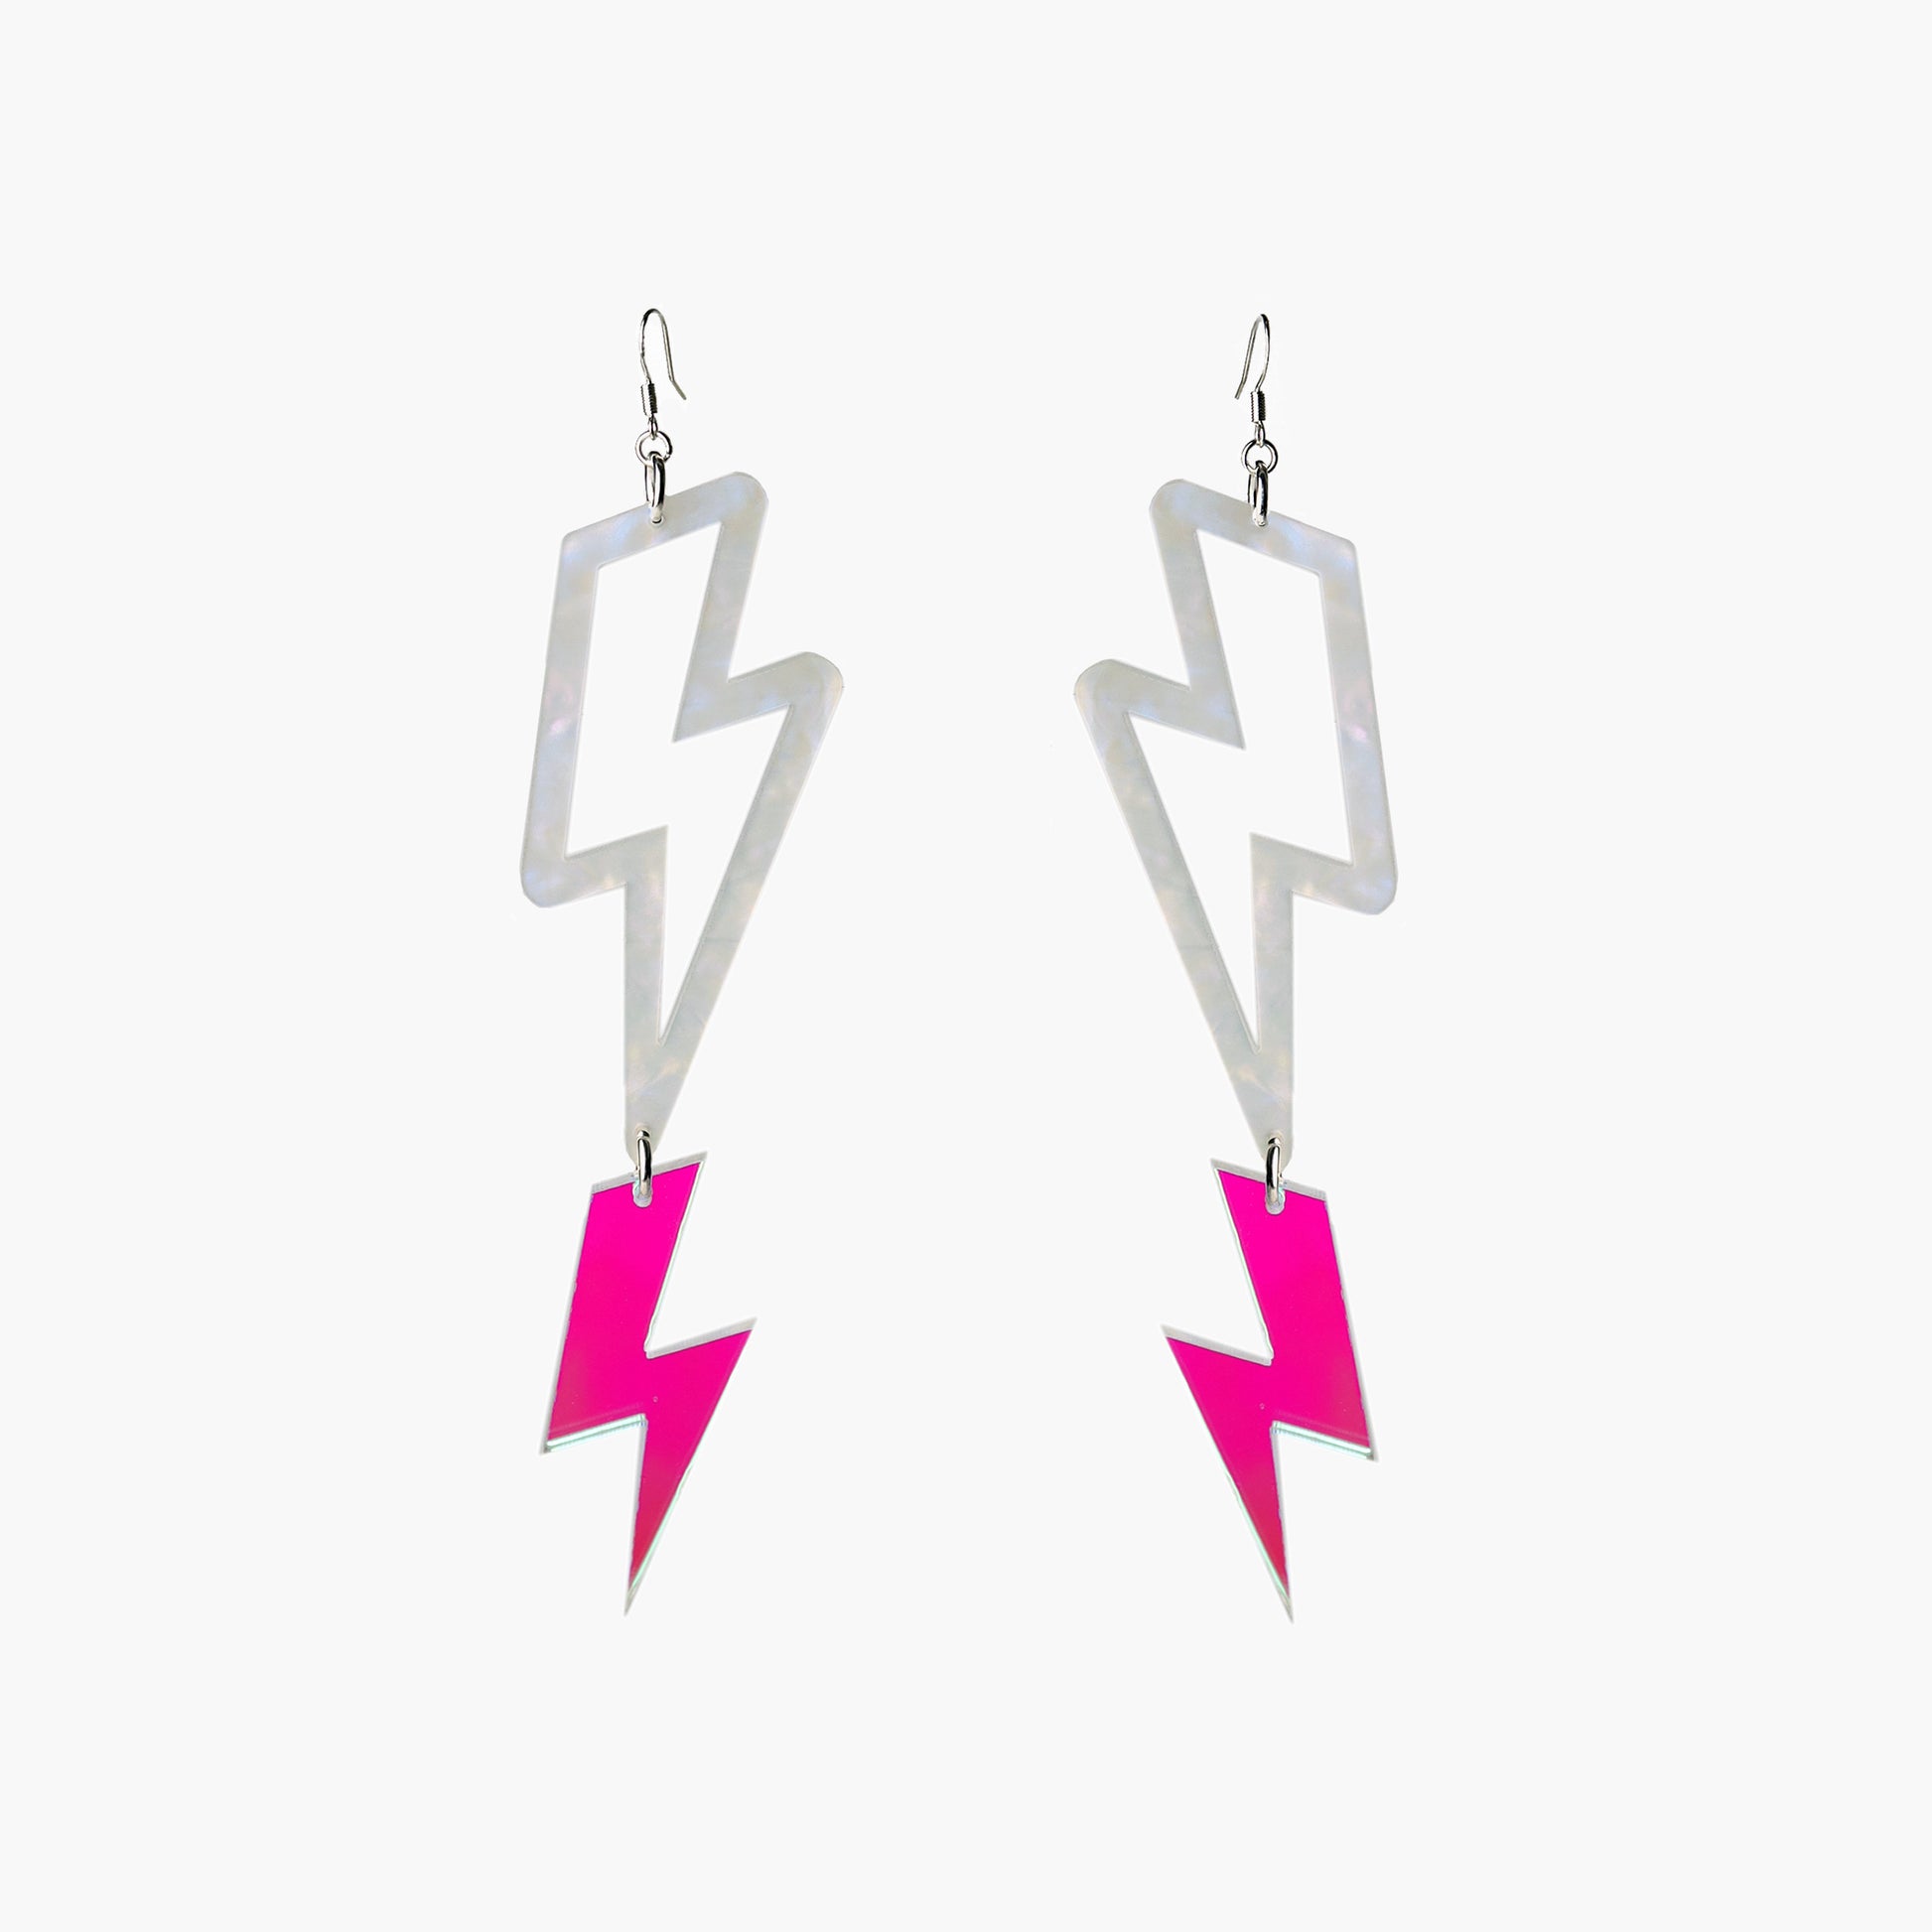 Front view image of Indi City Double Lightning Earrings in cloudy white and transparent iridescent acrylic. 